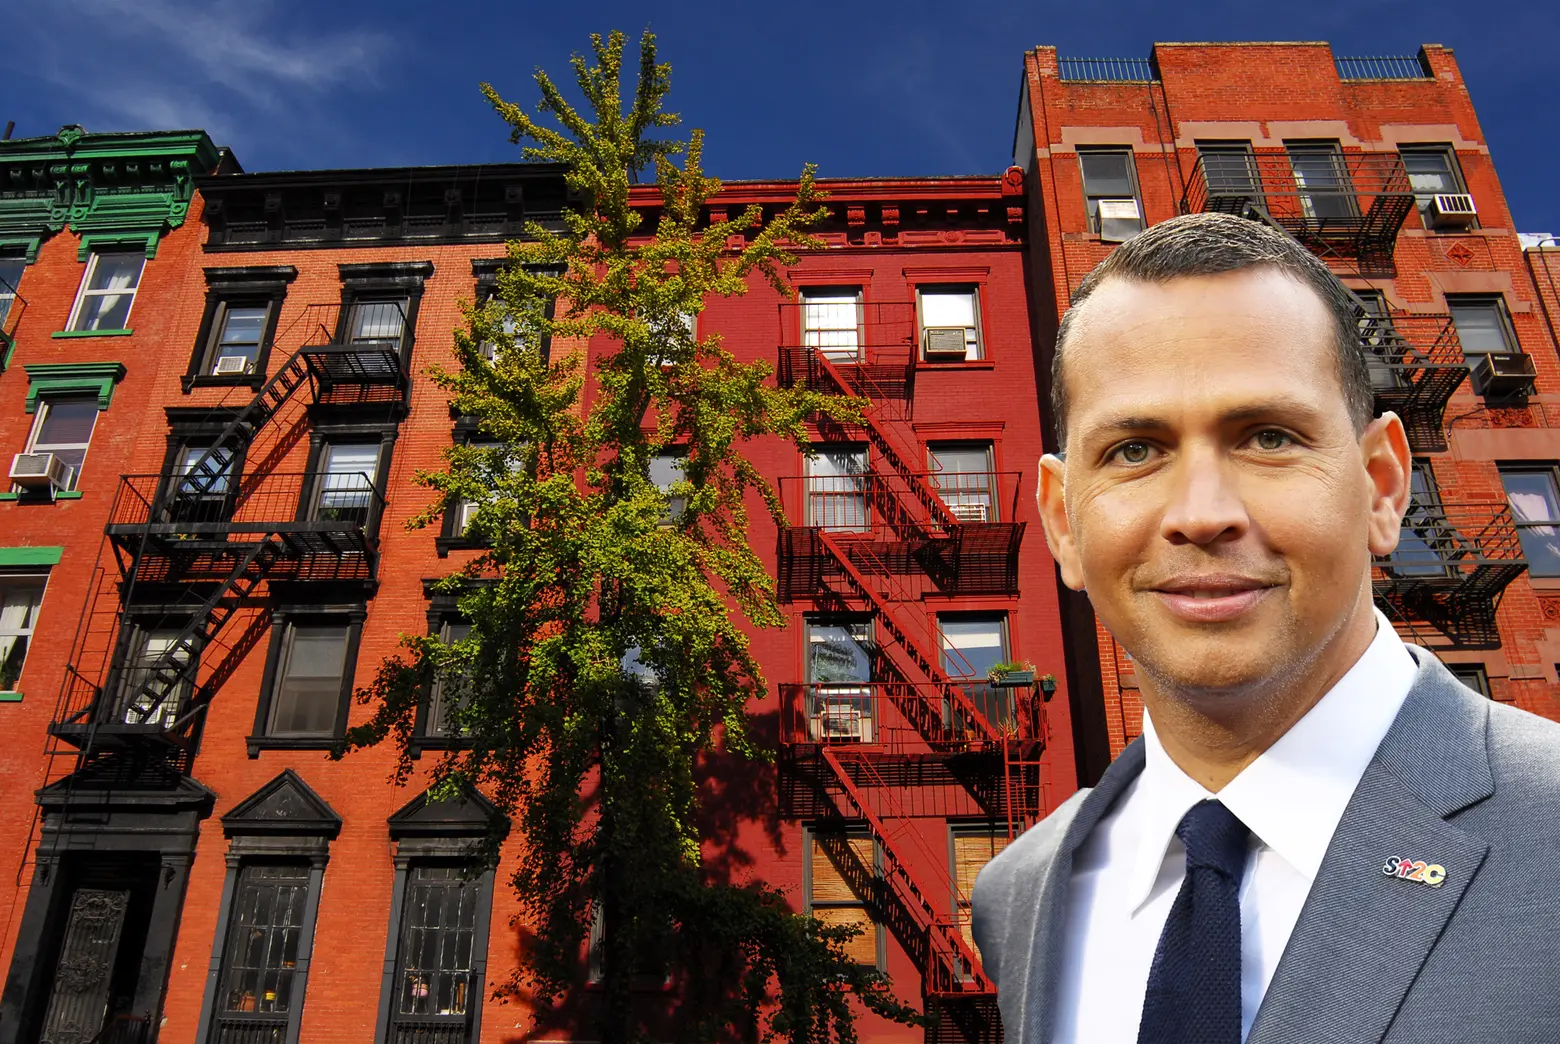 A-Rod steps up his NYC real estate game with a new partnership to buy multiple apartment buildings